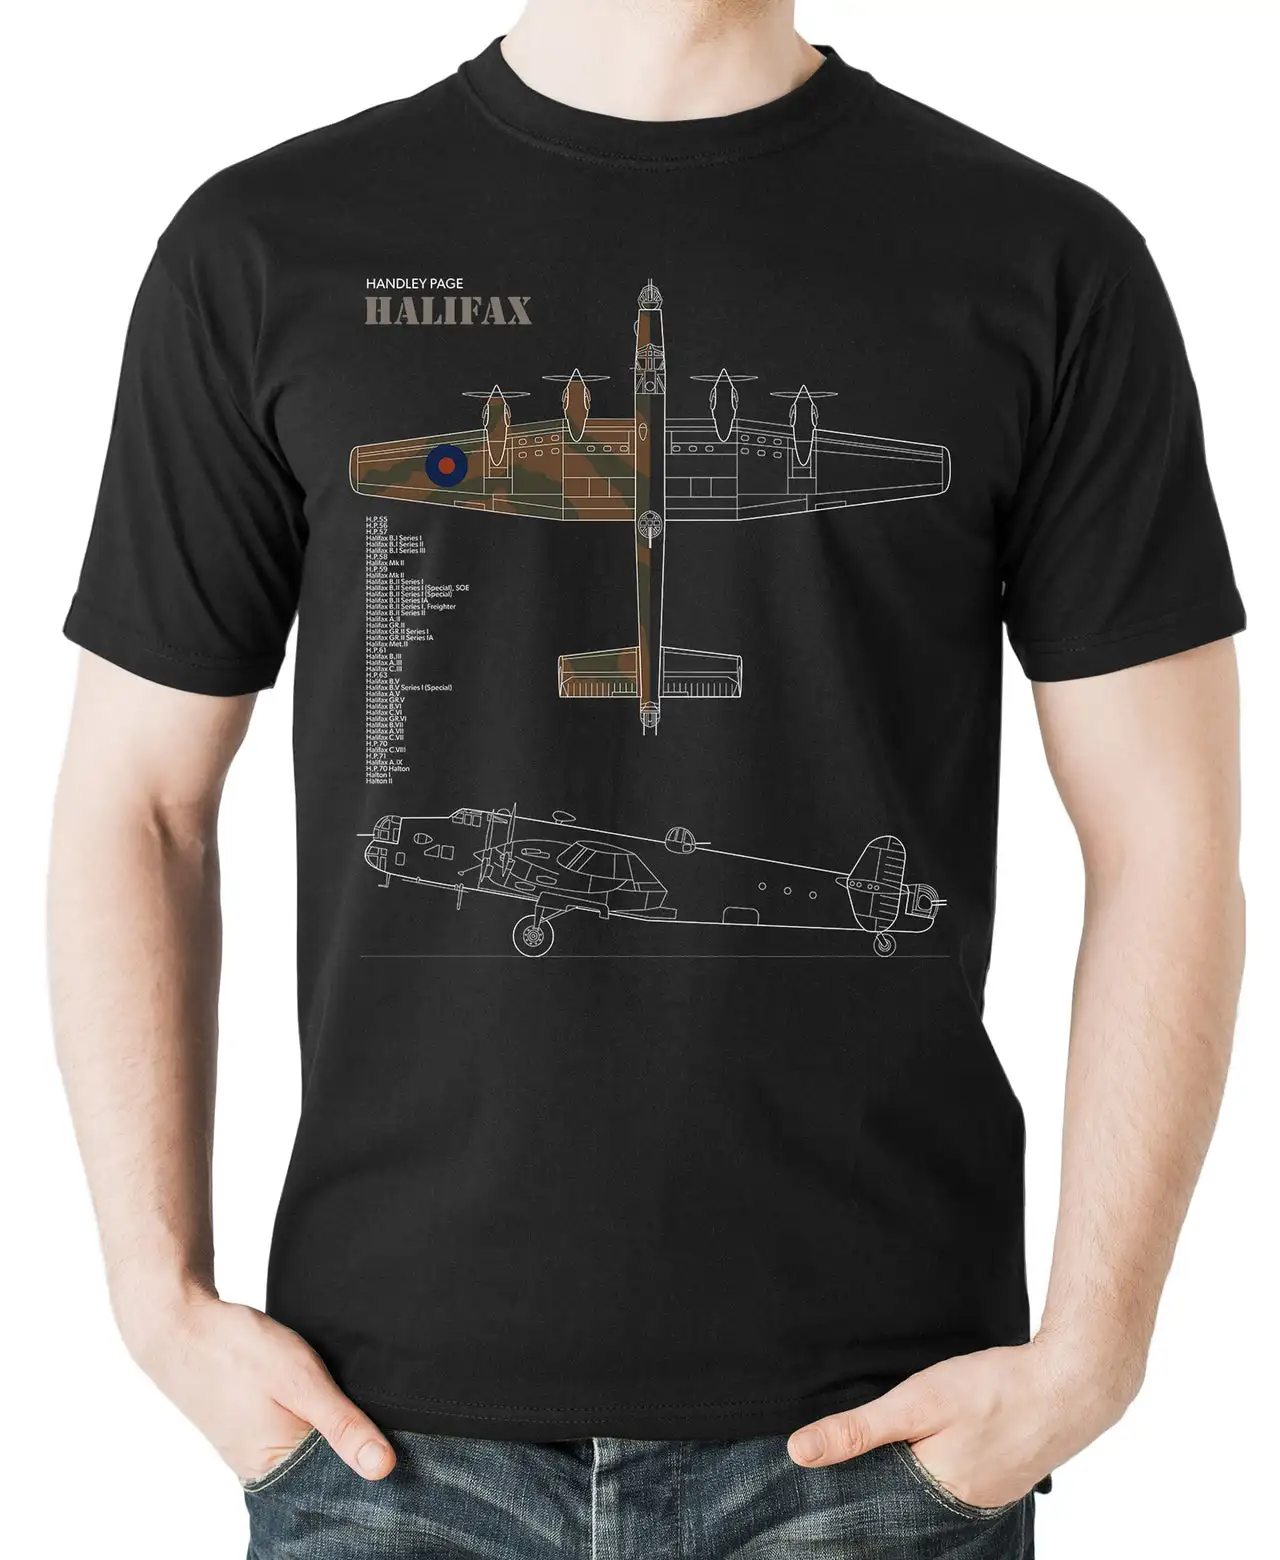 

WWII RAF Halifax Heavy Bomber T-Shirt 100% Cotton O-Neck Summer Short Sleeve Casual Mens T-shirt Size S-3XL